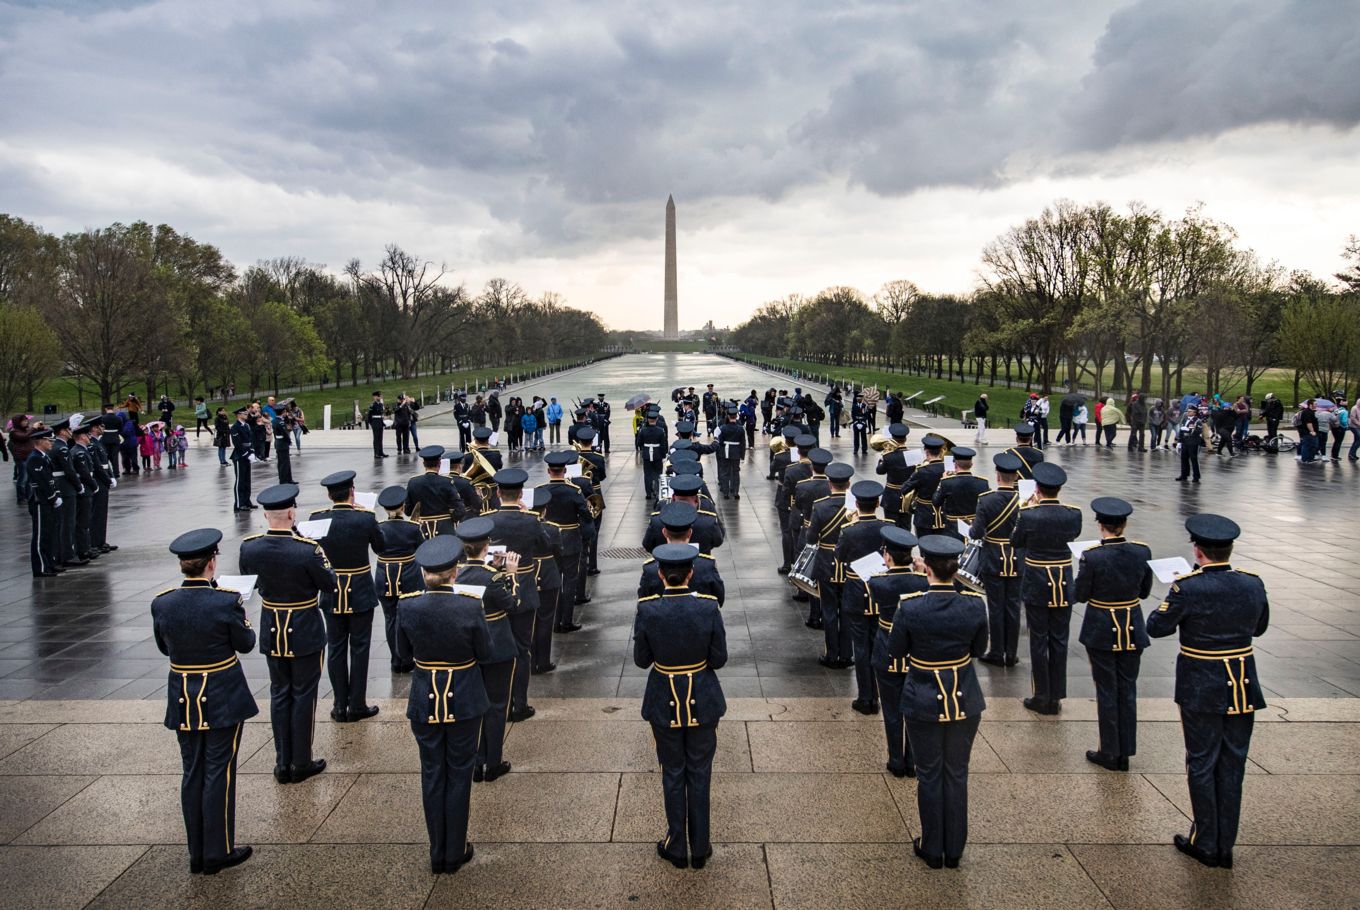 Band parade in front of the Lincoln Memorial.